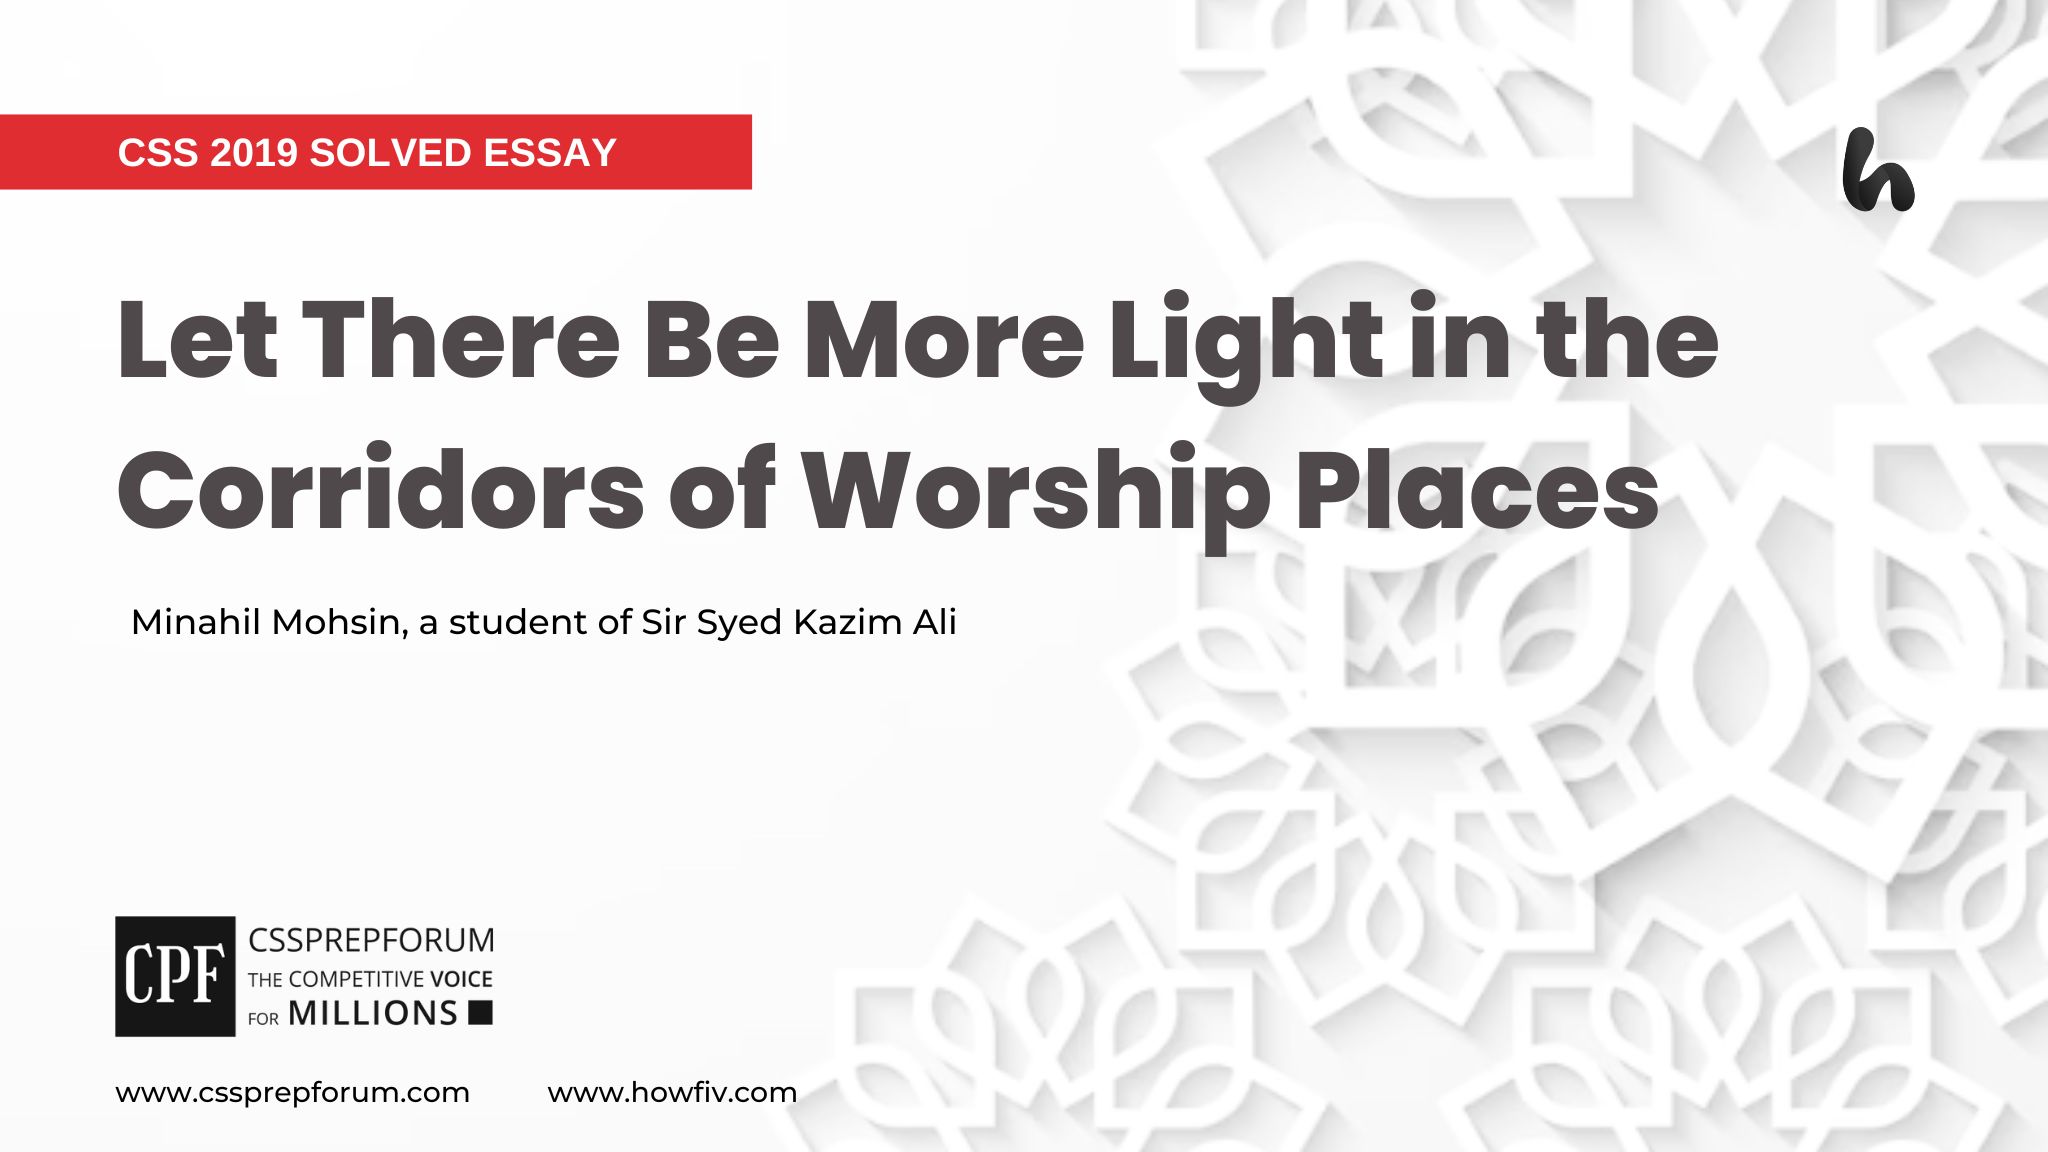 CSS 2019 Solved Essay | Let There Be More Light in the Corridors of Worship Places